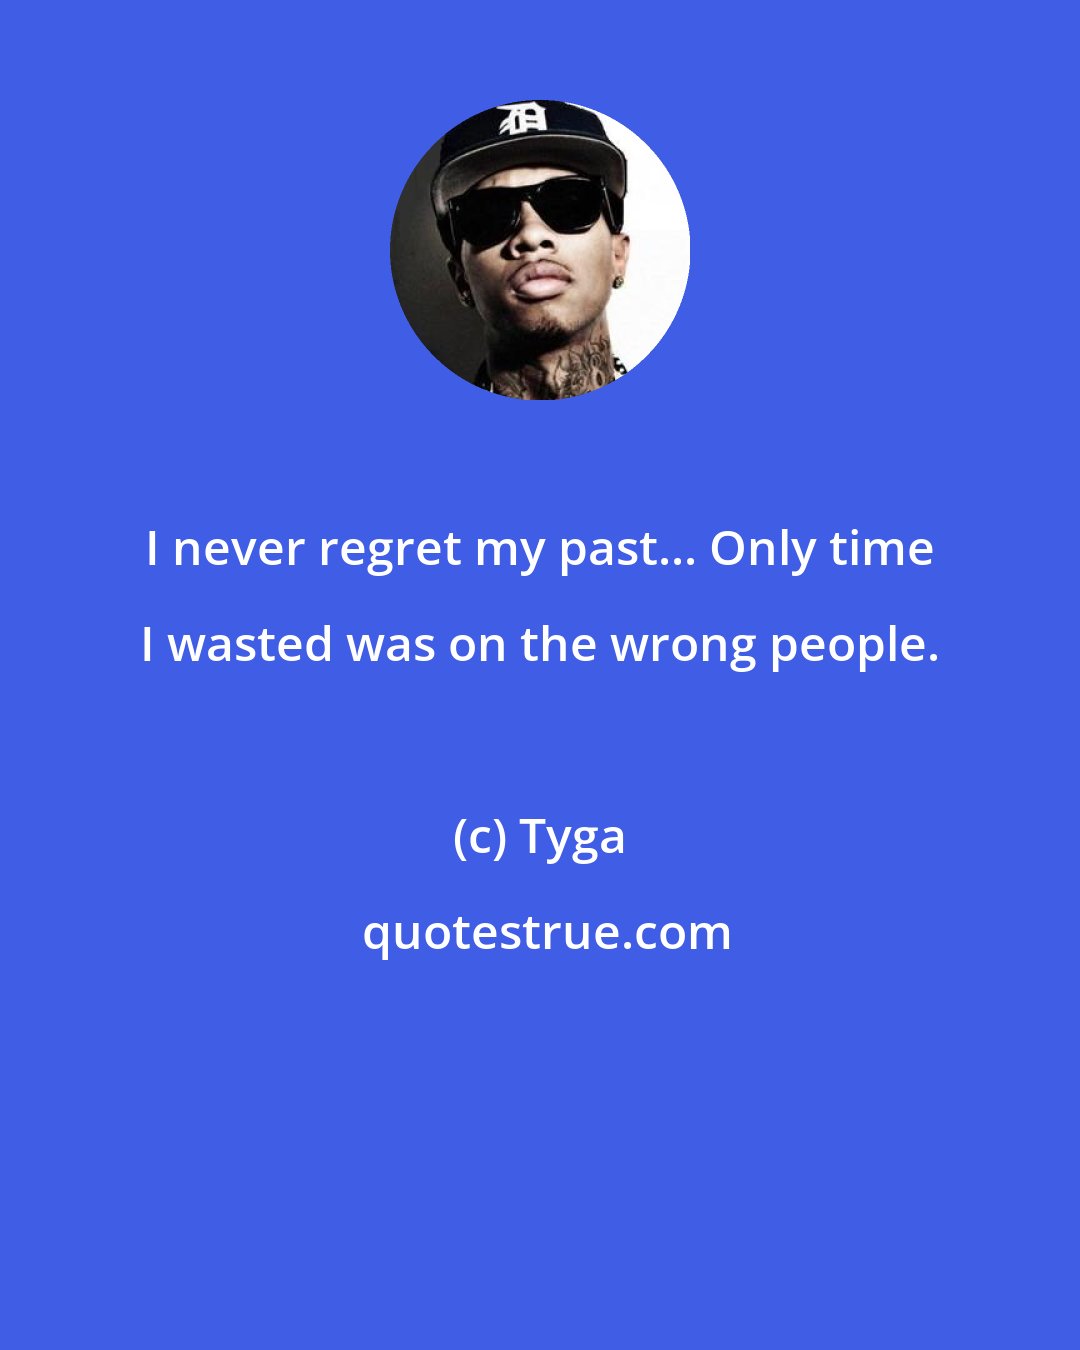 Tyga: I never regret my past... Only time I wasted was on the wrong people.